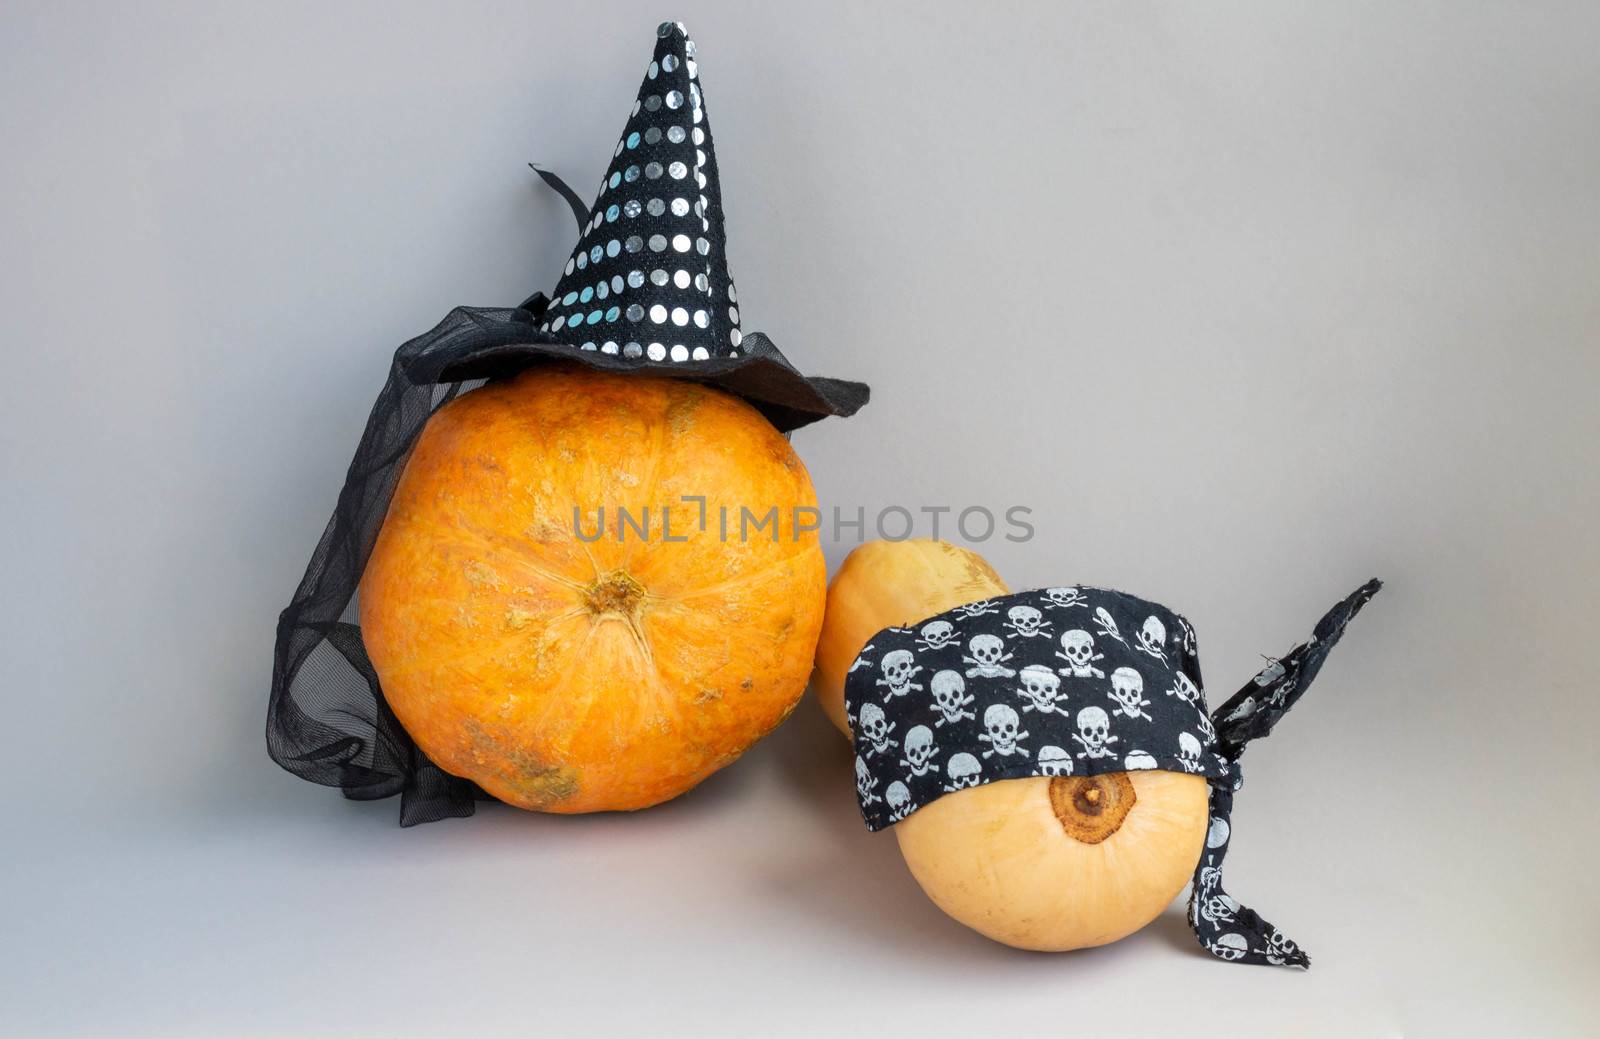 The Concept Of Halloween. An orange pumpkin in a Witch's hat and a pumpkin in a pirate bandana by lapushka62